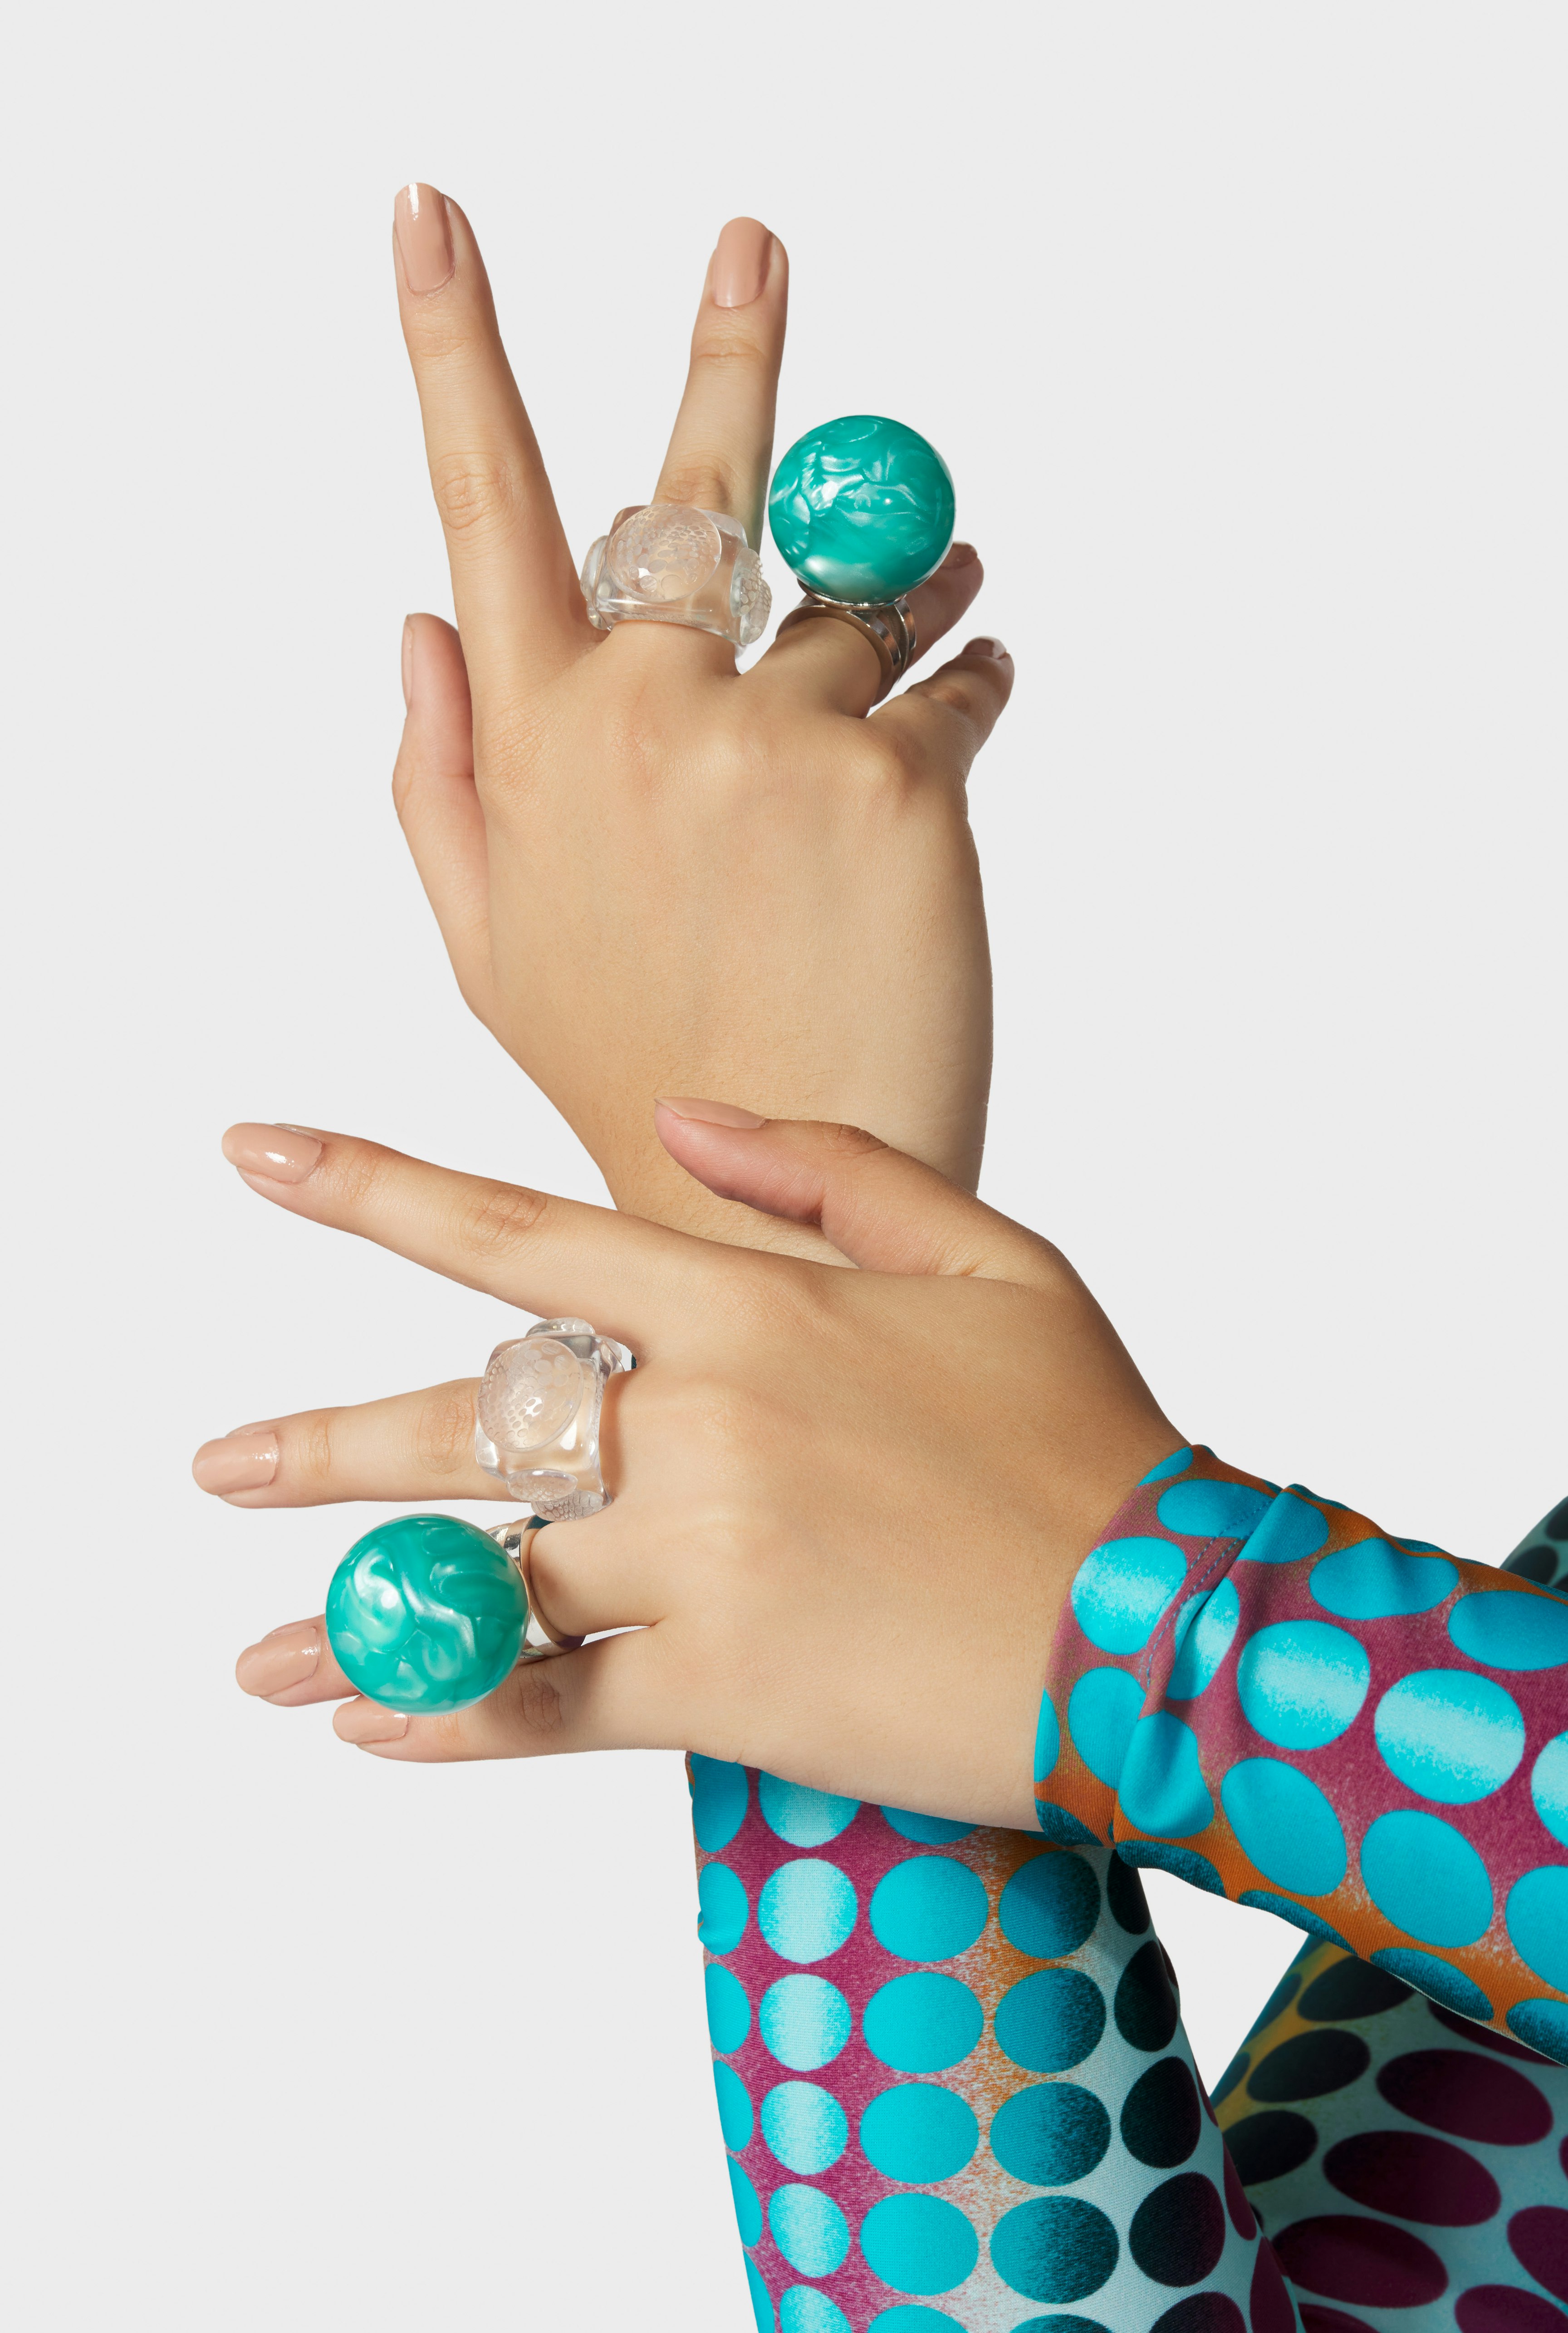 The Turquoise Cyber Ball Ring